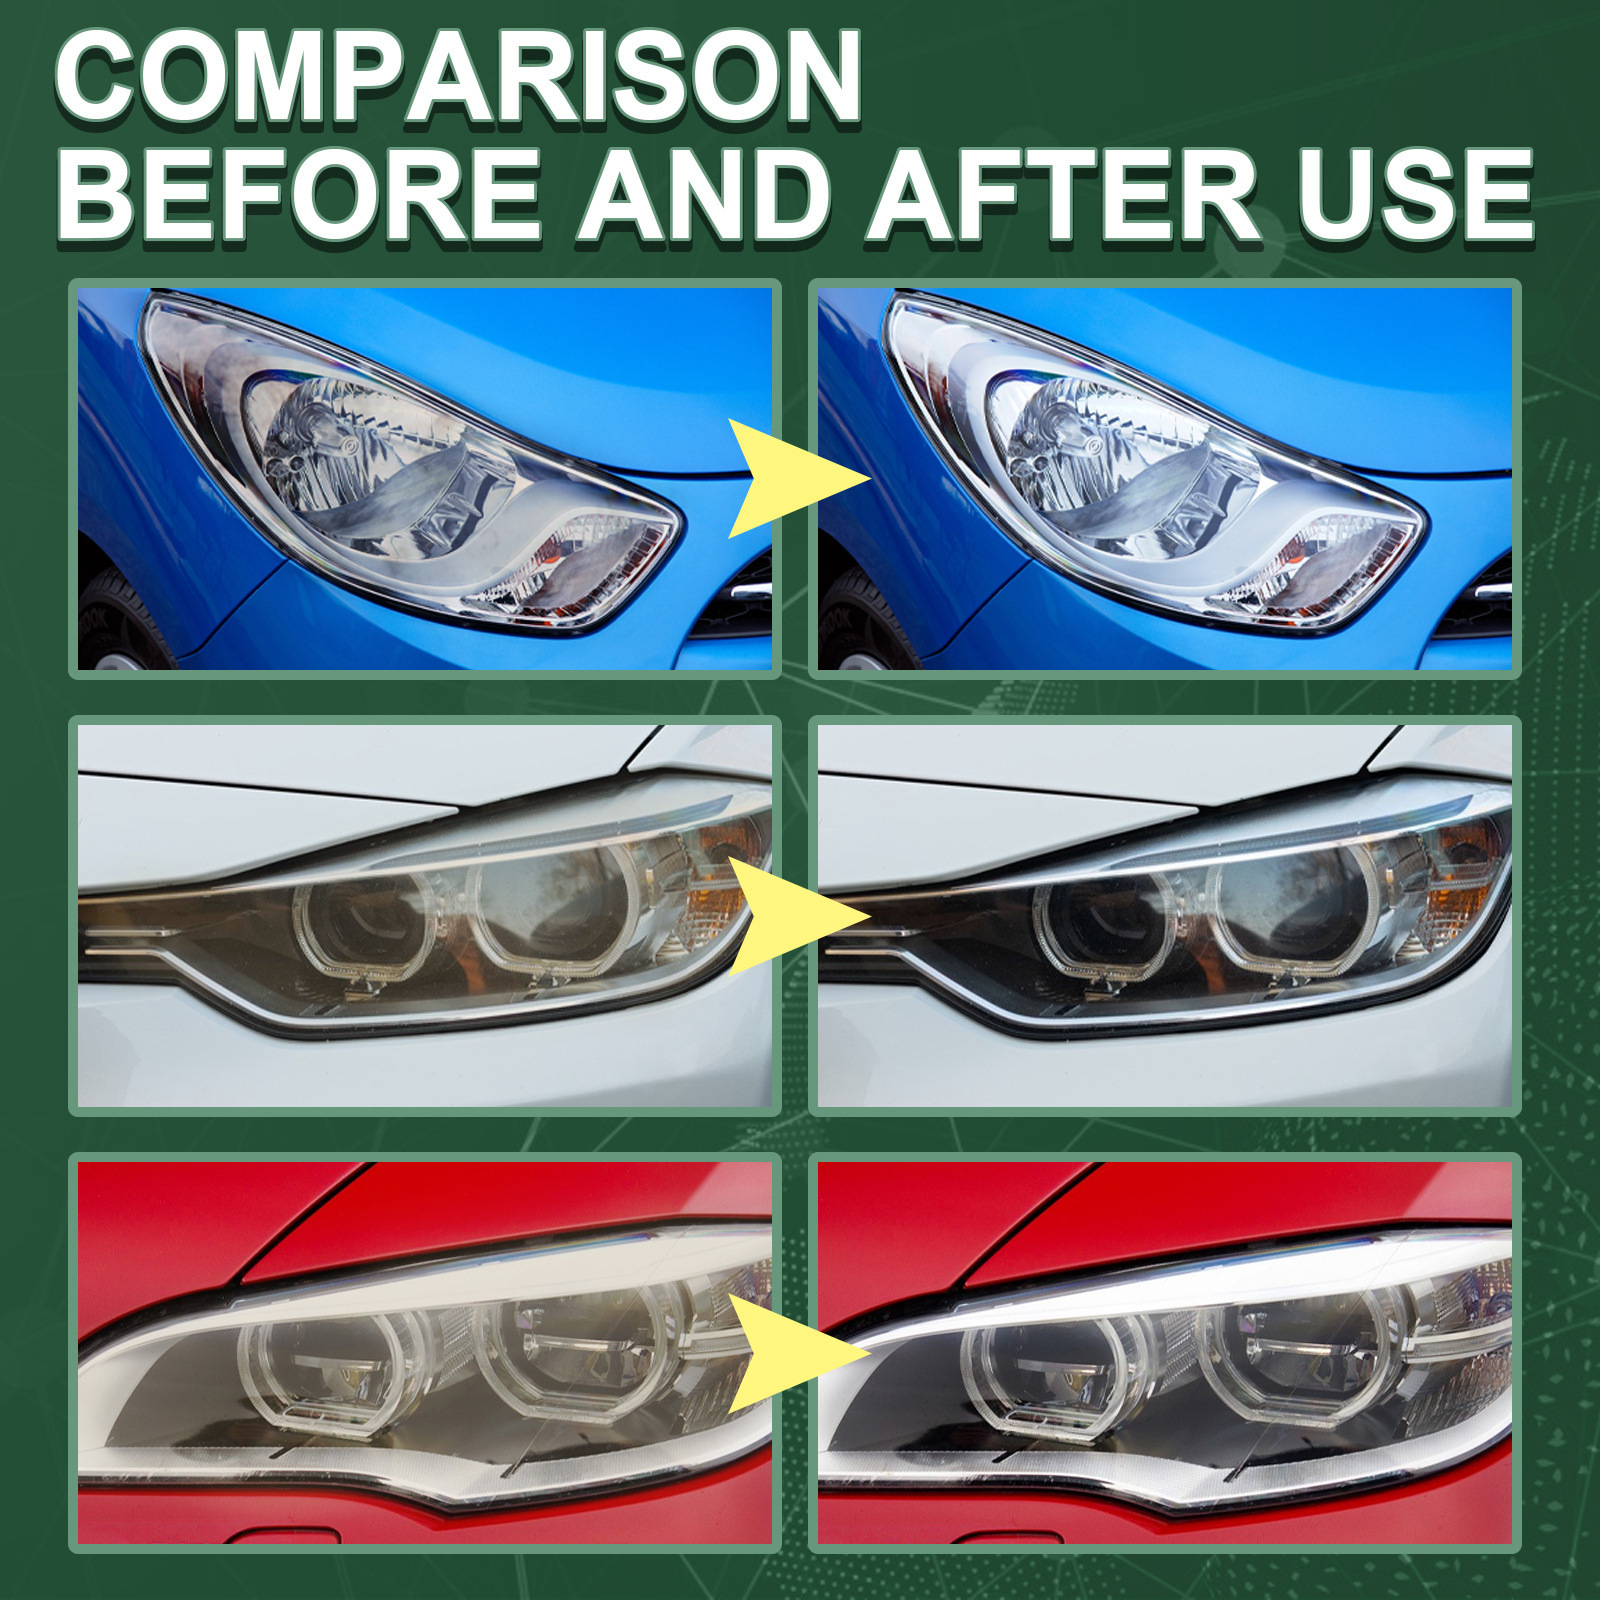 high quality headlight restoration system remove haze scratches and yellowing make your headlights shine again